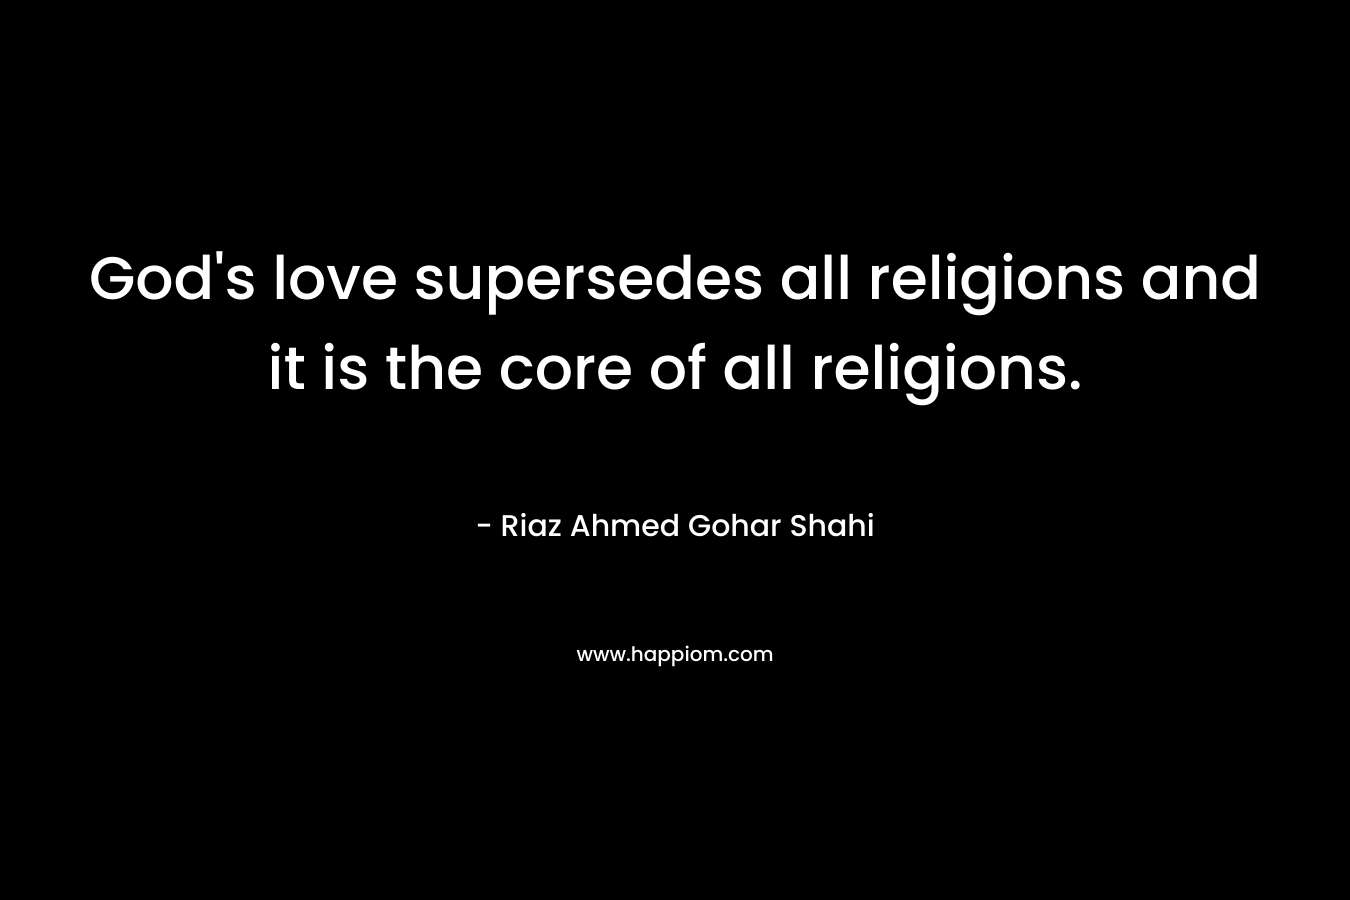 God's love supersedes all religions and it is the core of all religions.